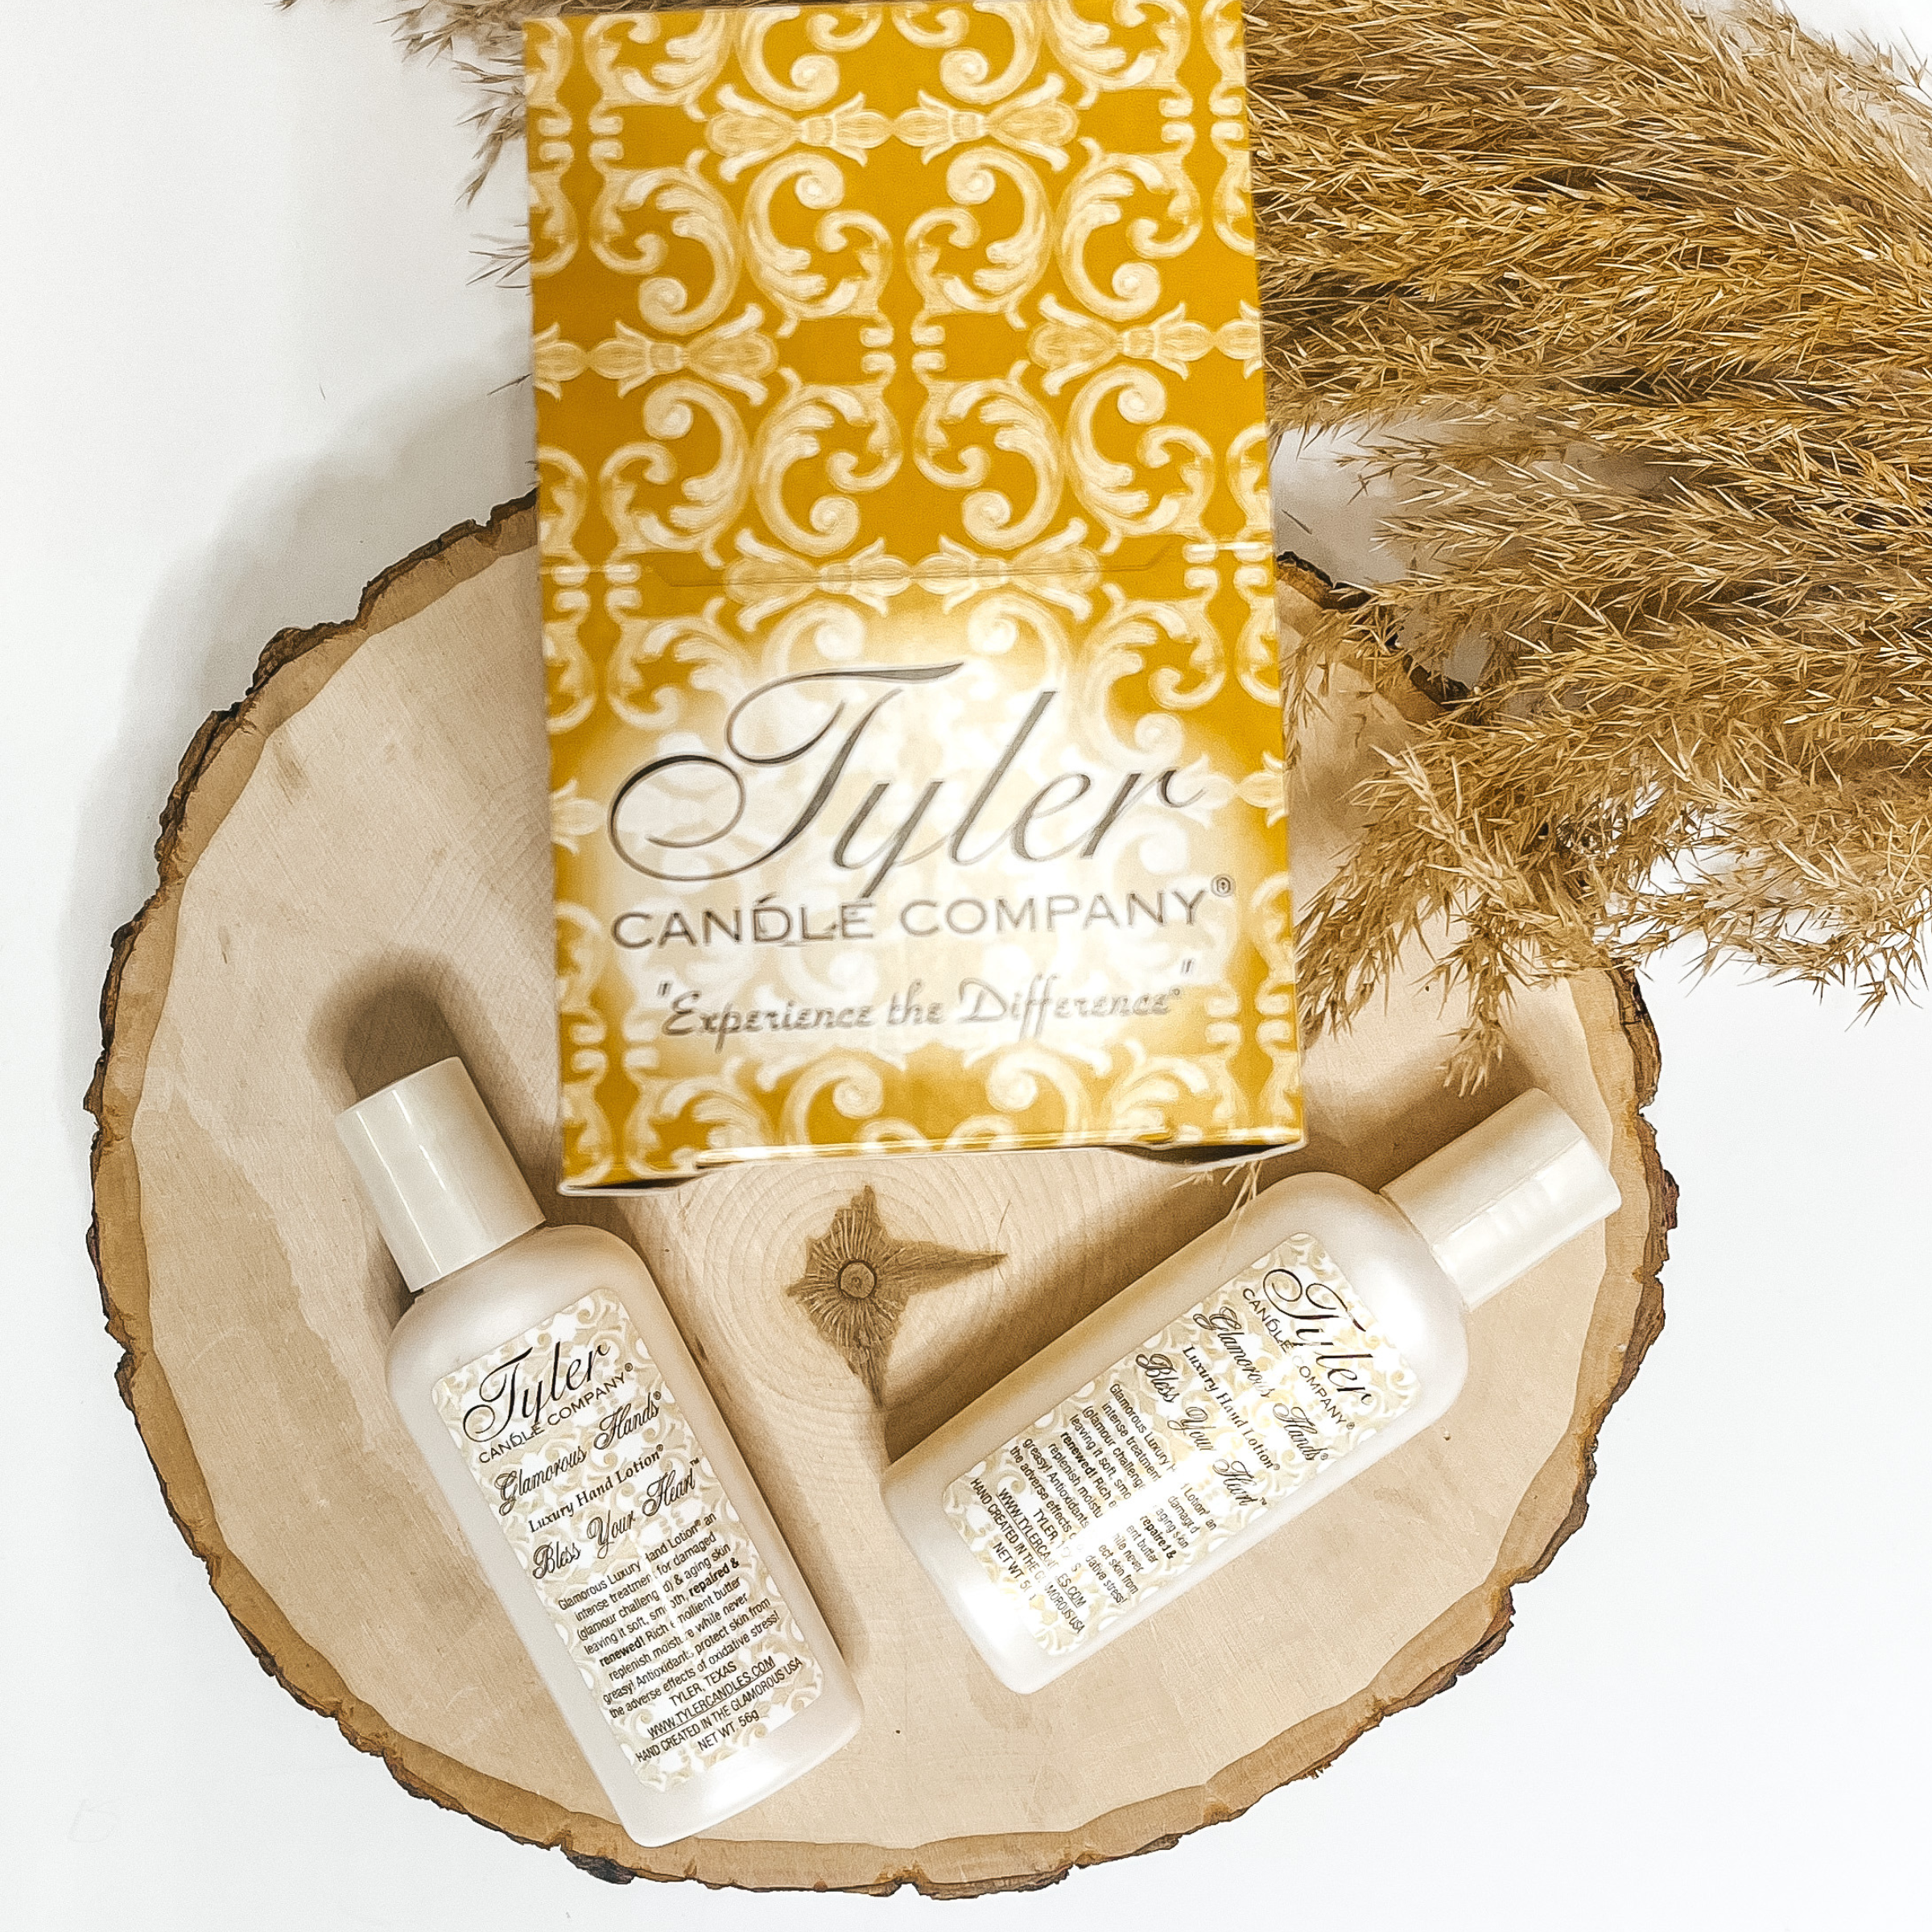 Glamourous hand lotion pictured in 2 oz size of Bless Your Heart scent pictured on tree wood with a Tyler logo.